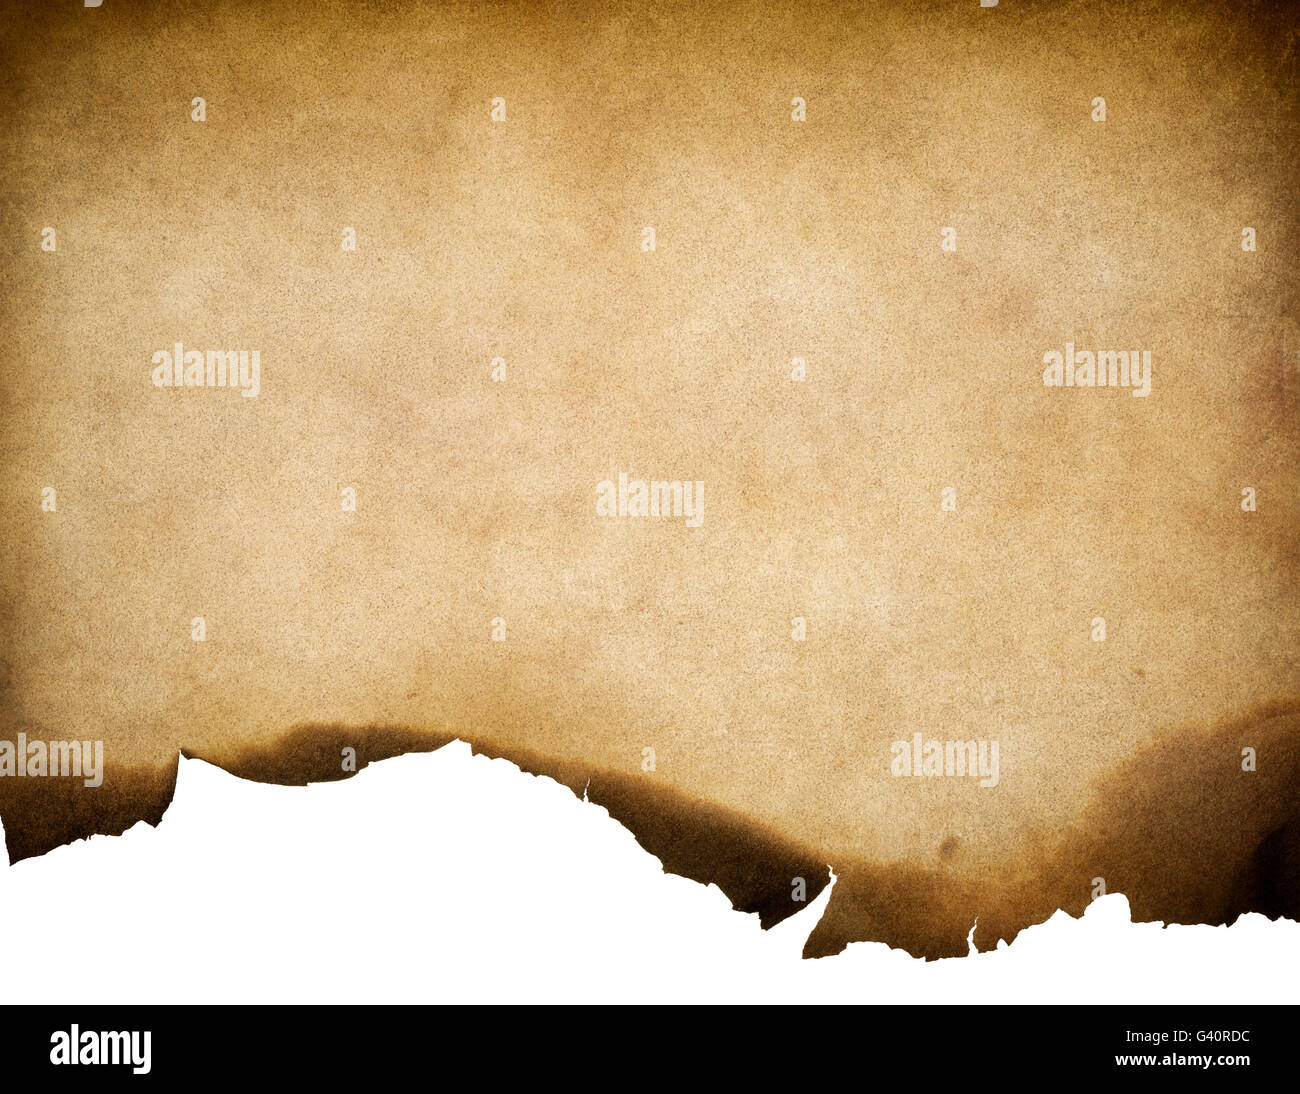 Aged paper texture can be used as background Stock Photo